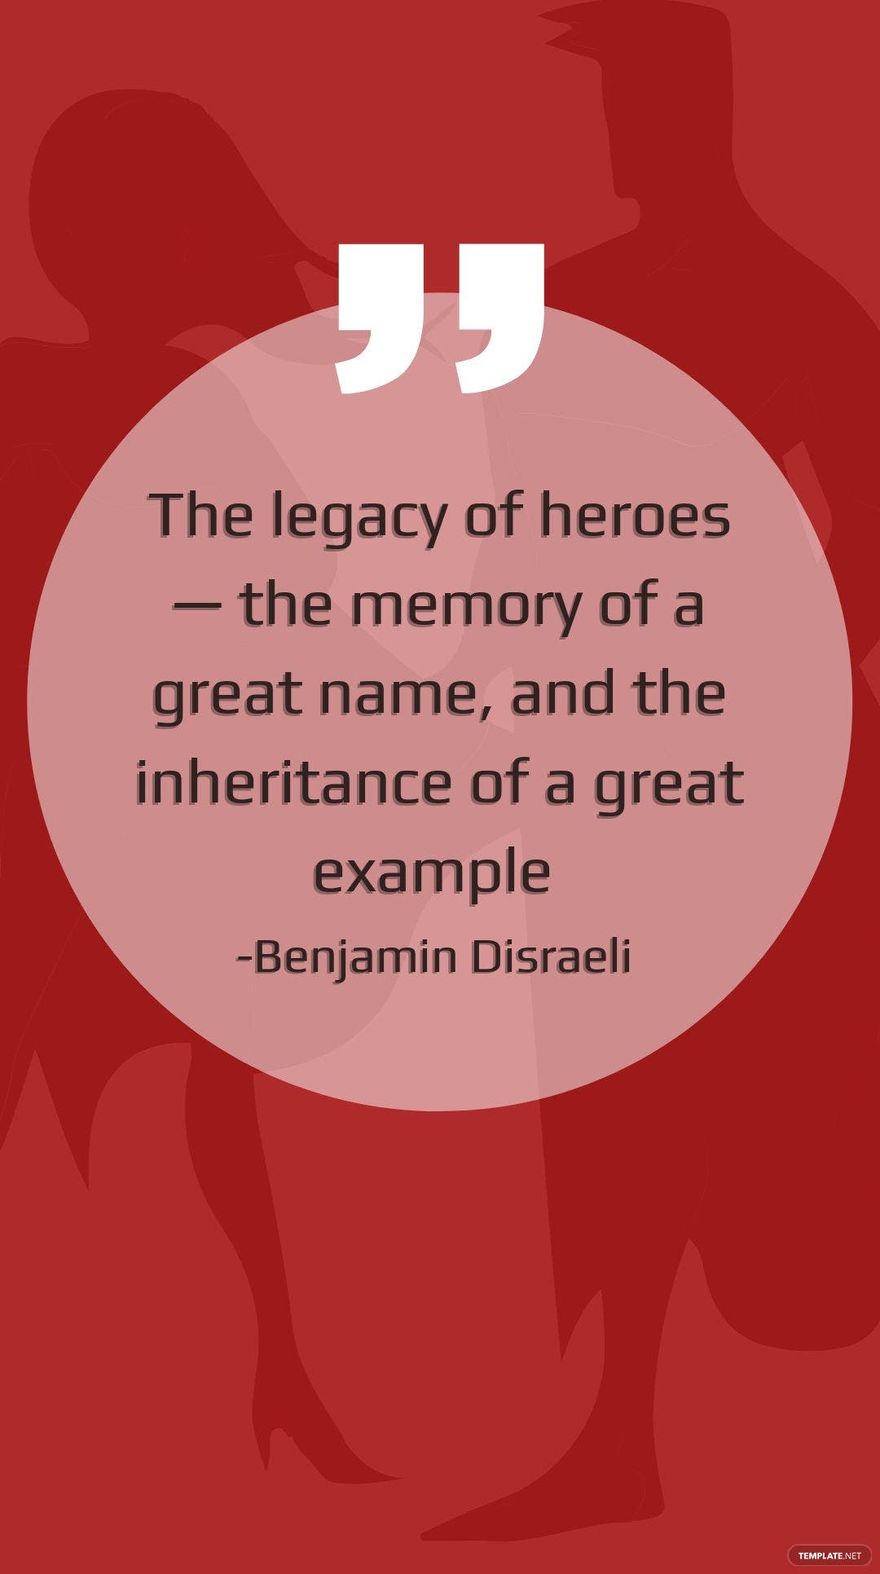 Benjamin Disraeli - The legacy of heroes — the memory of a great name, and the inheritance of a great example